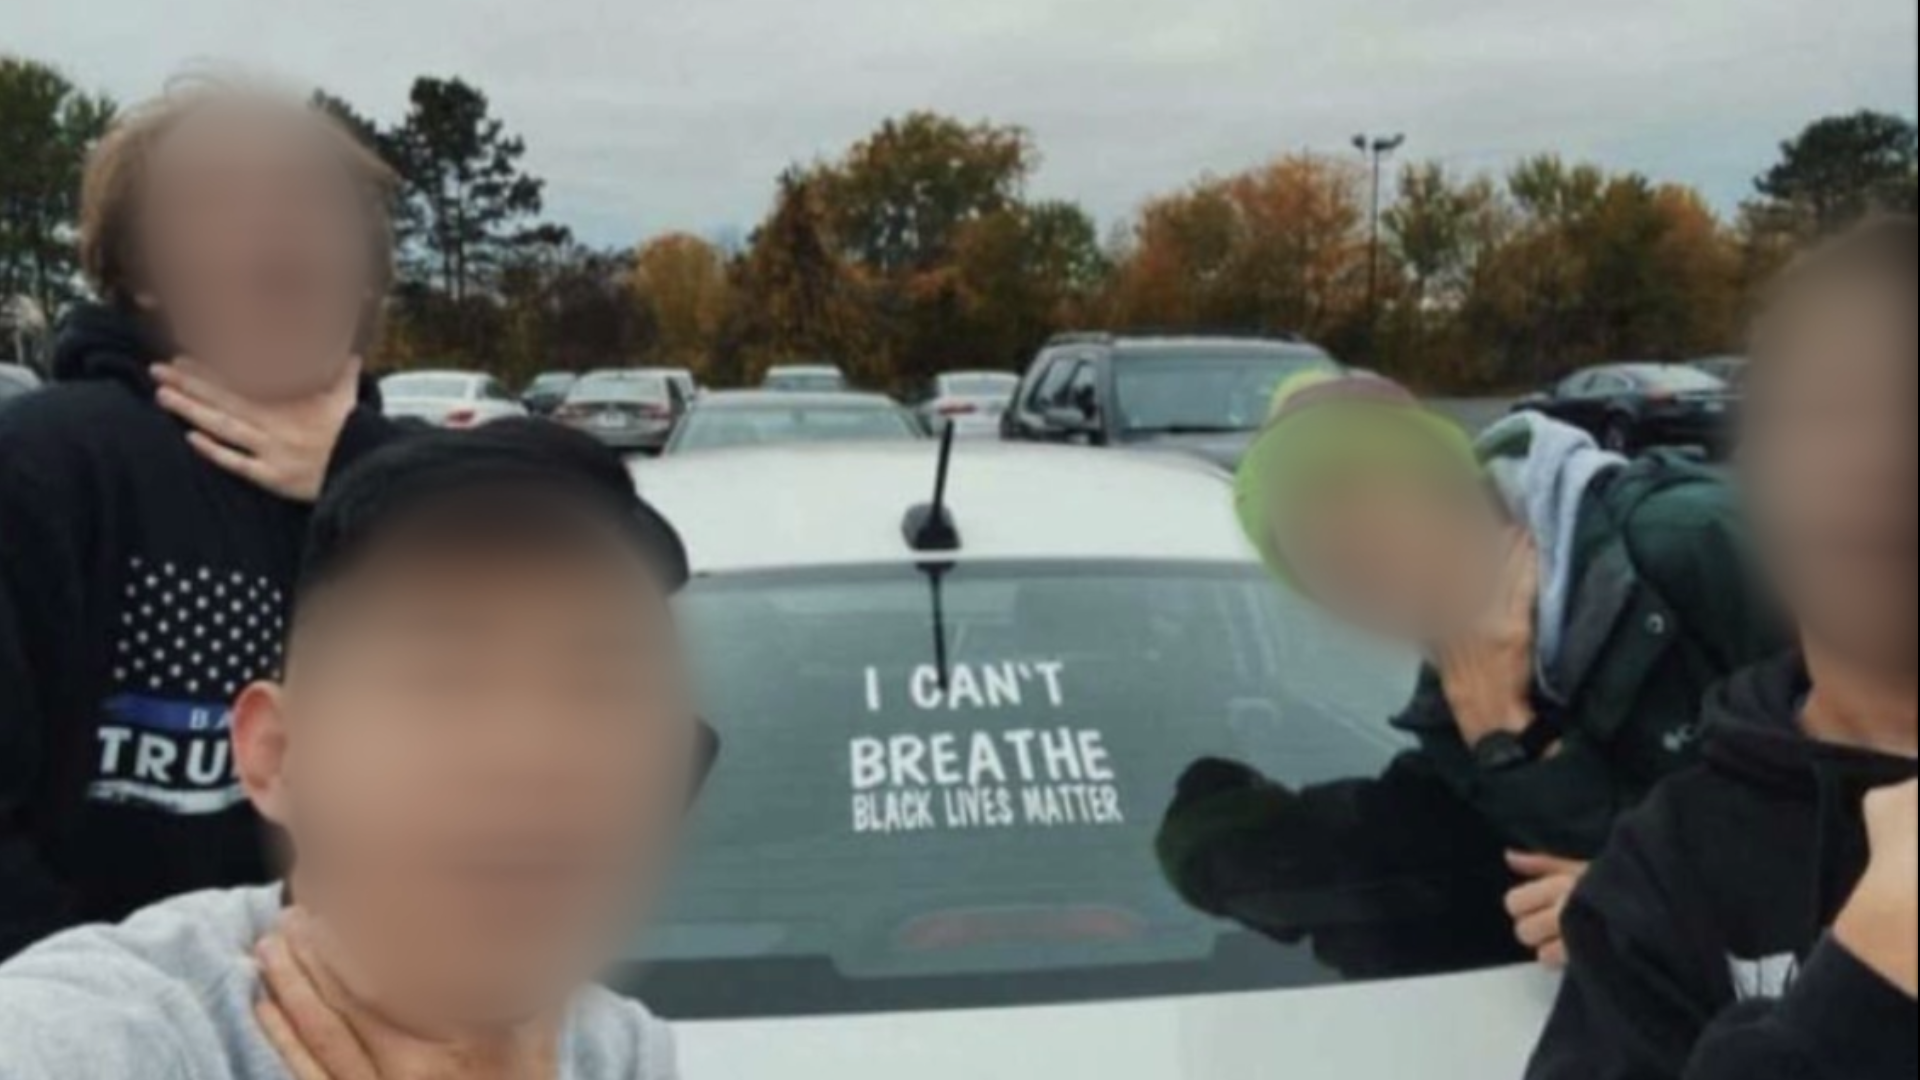 A picture widely shared on social media shows four West Michigan teenagers appearing to mock the death of George Floyd, in front of a Black Lives Matter decal.